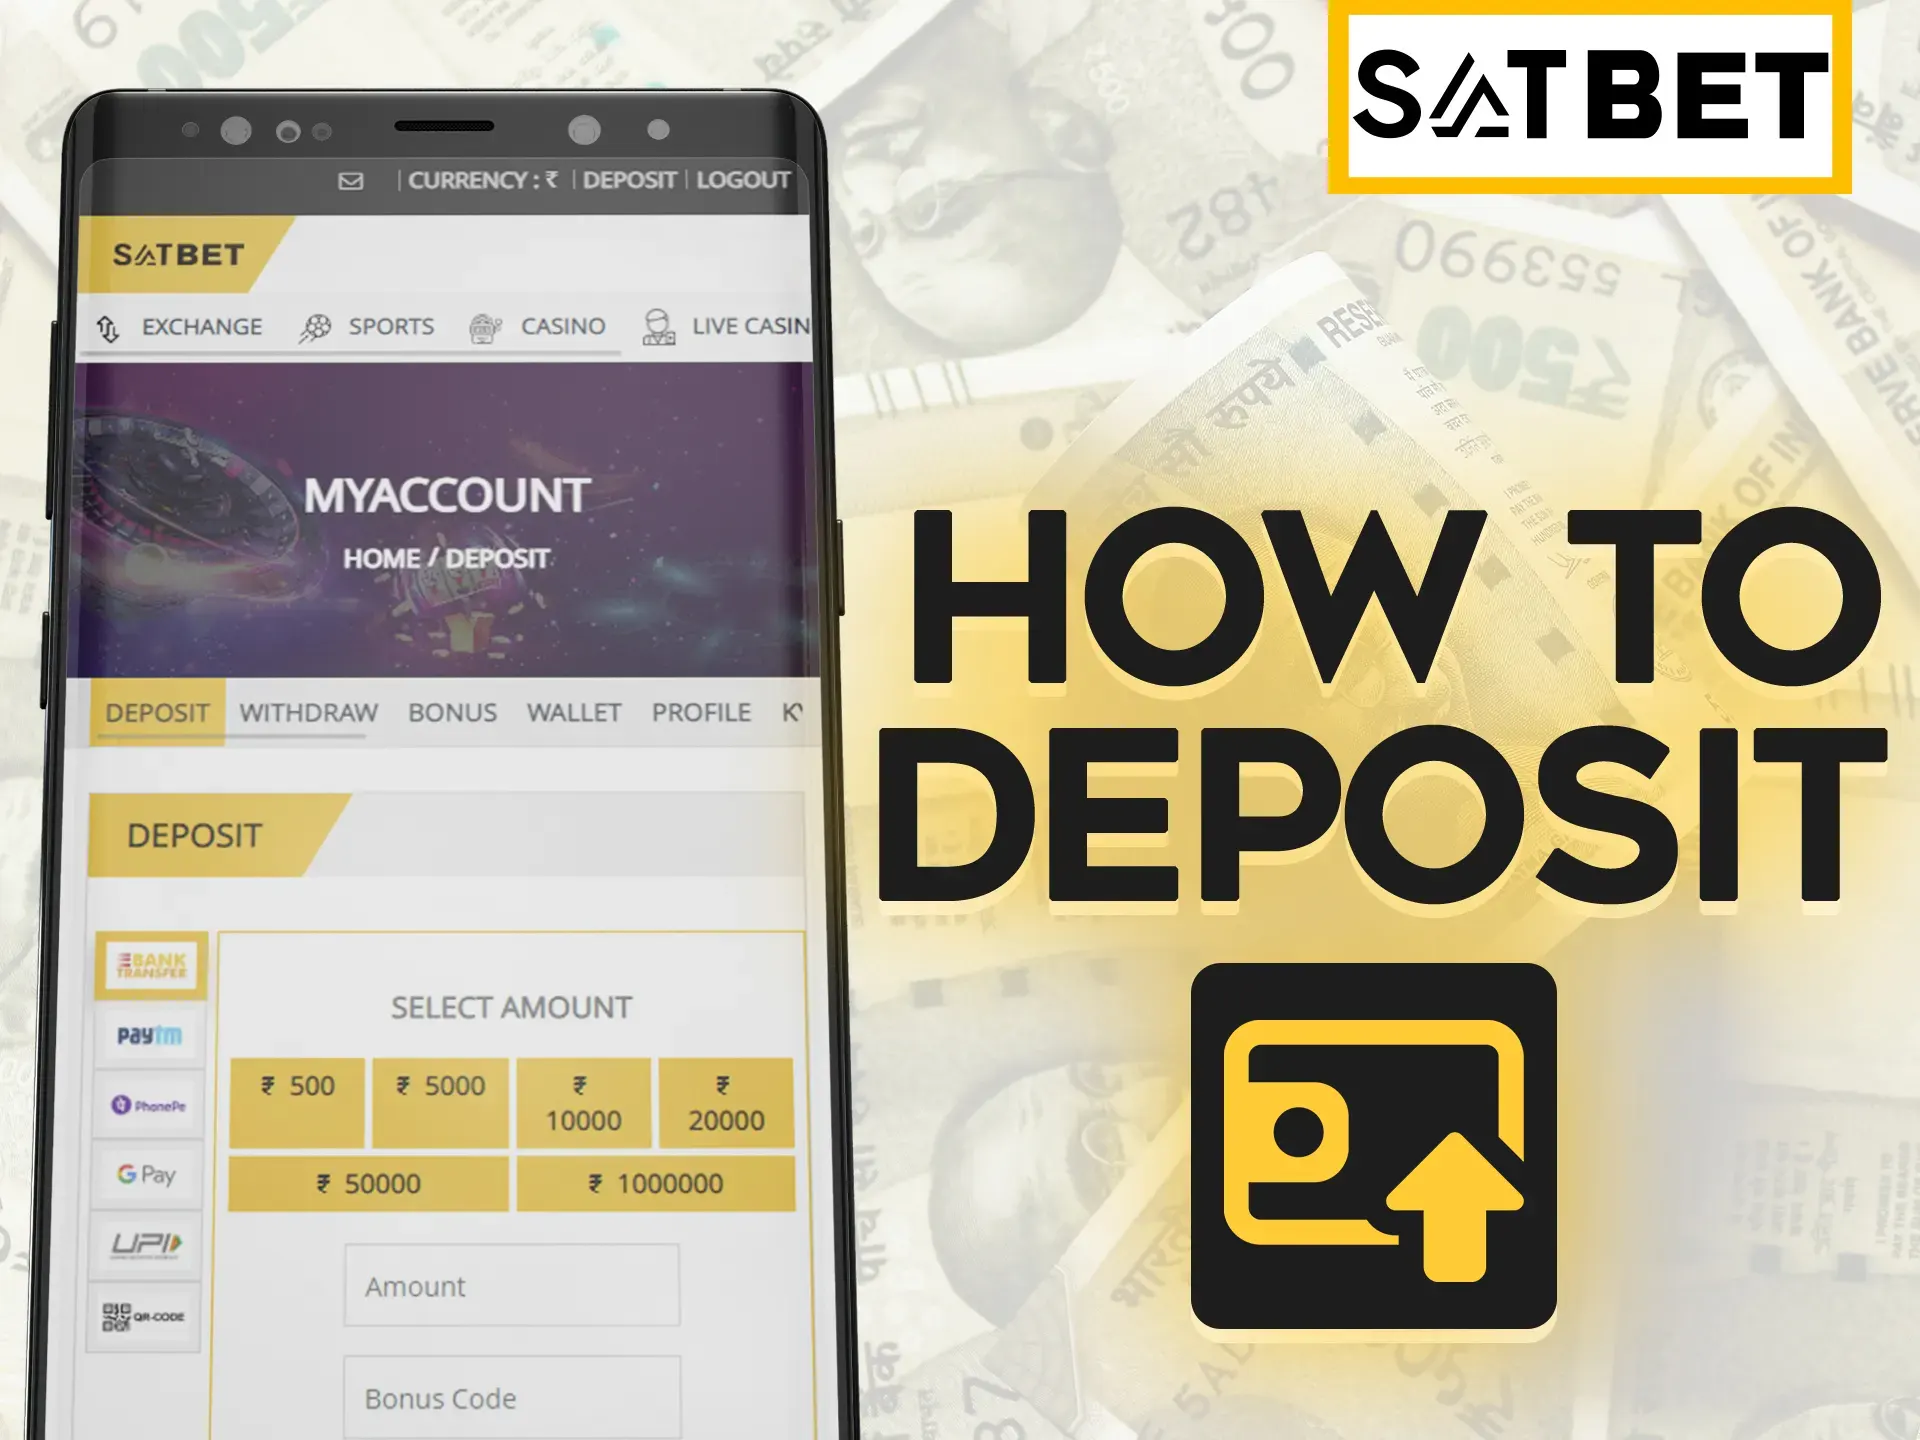 Enter on the Satbet deposit page and make your first deposit.